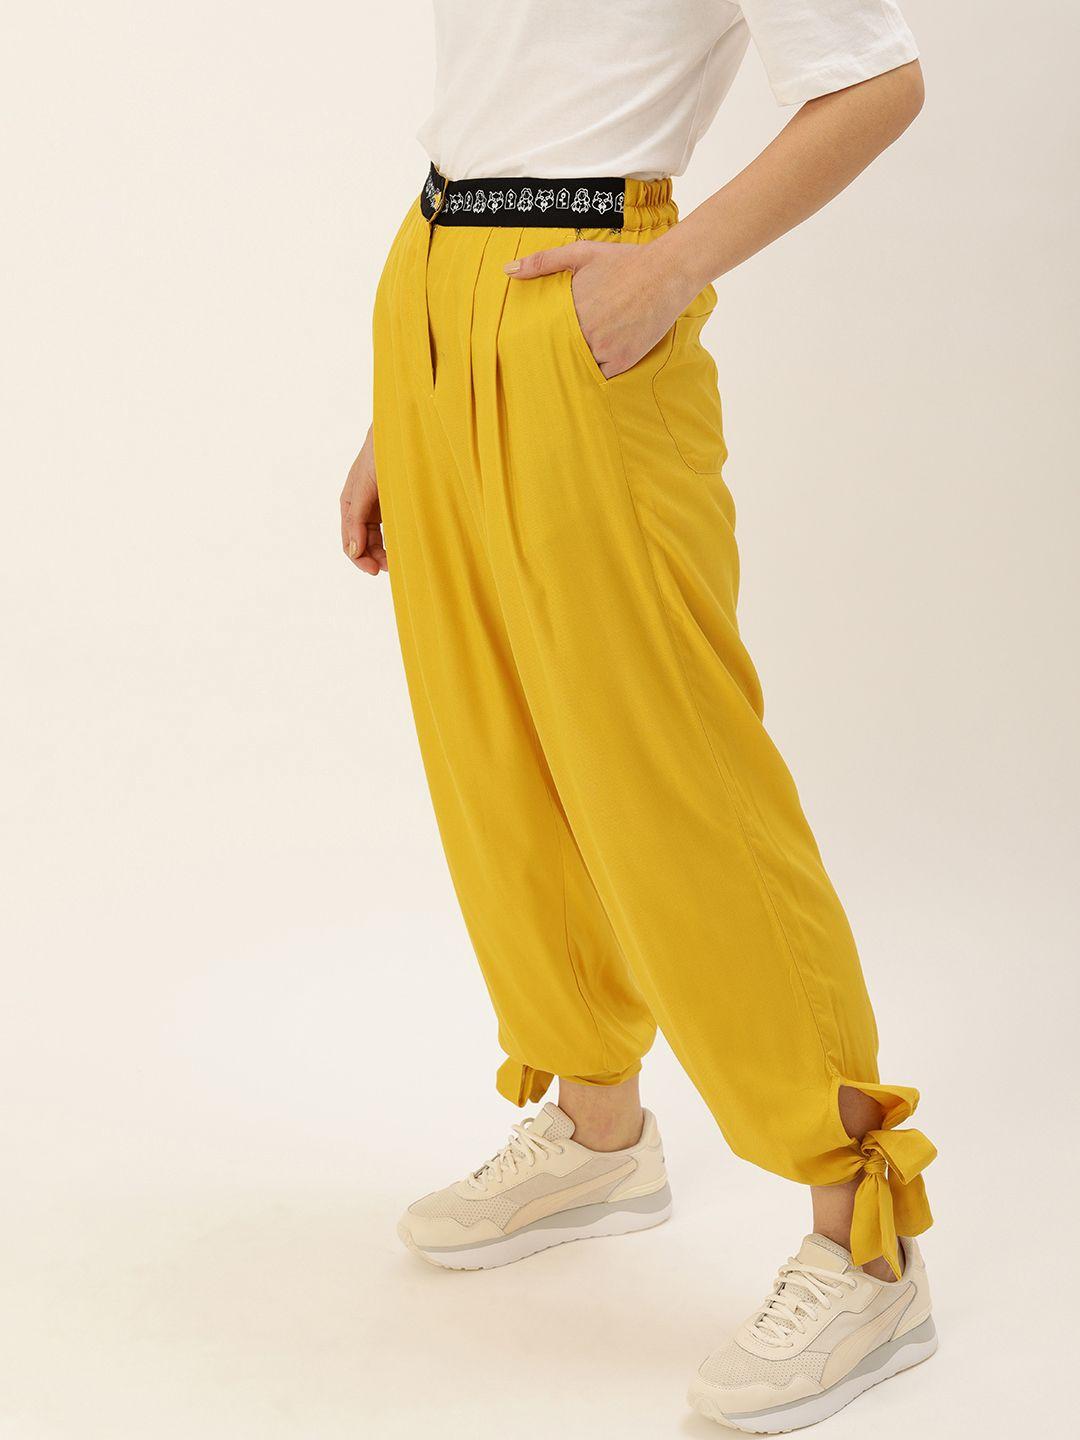 forever-21-women-mustard-yellow-pleated-joggers-trousers-with-printed-waistband